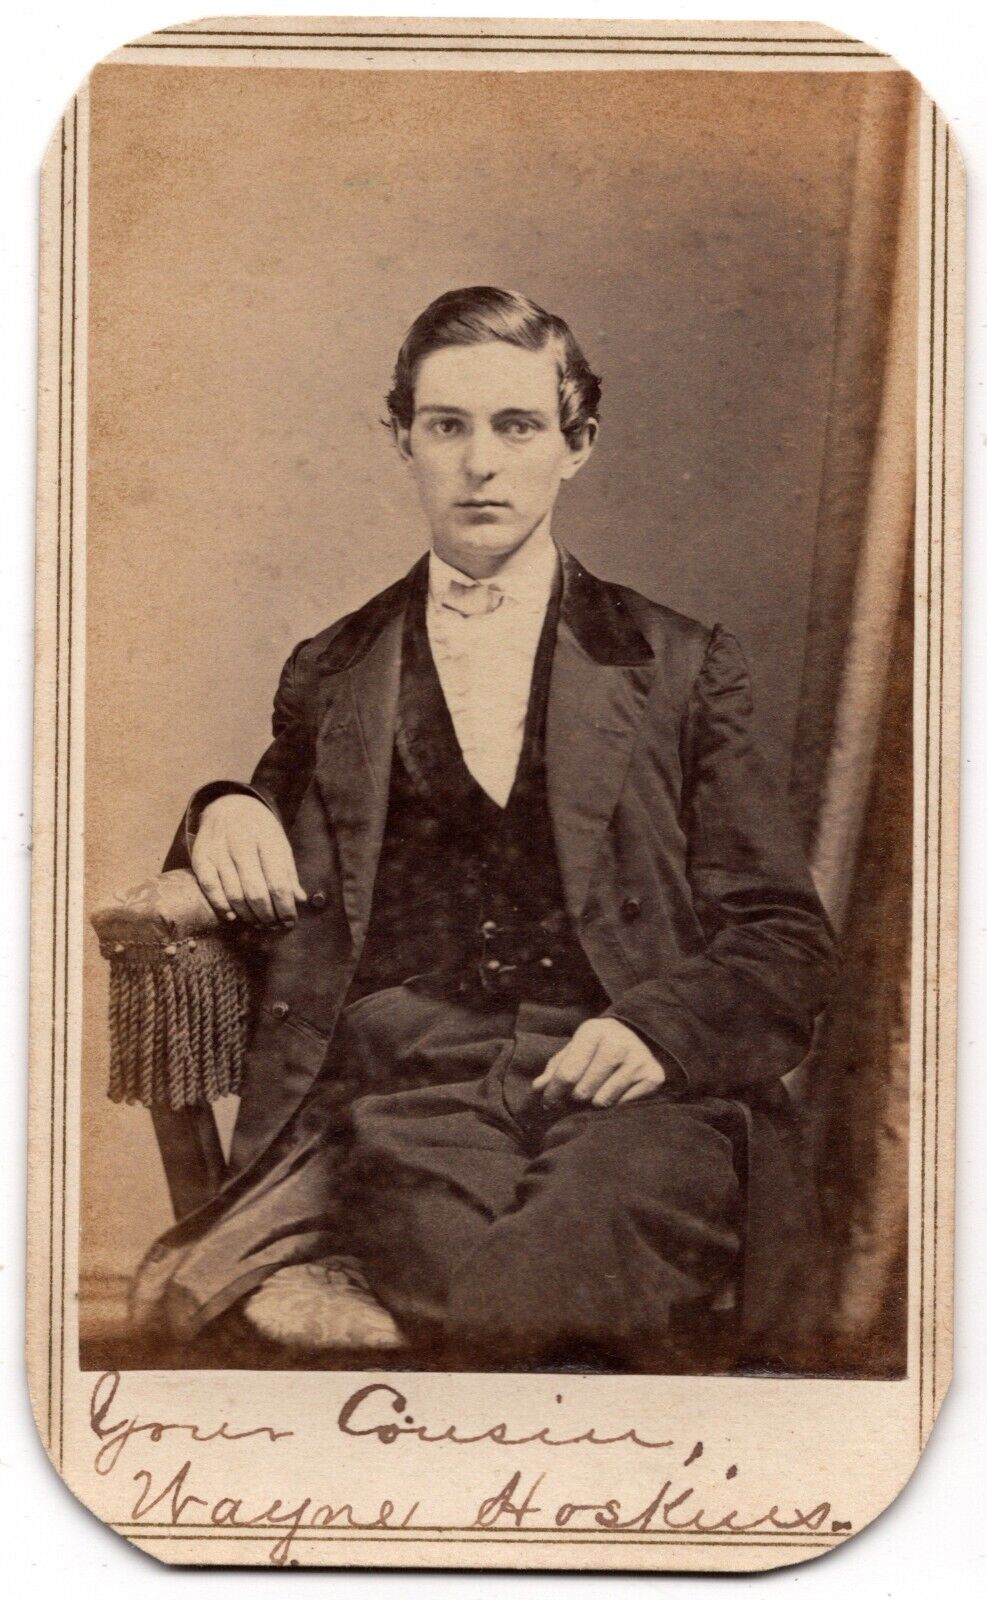 ANTIQUE CDV CIRCA 1860s DAVIS HANDSOME YOUNG MAN IN SUIT HARTFORD CONNETICUIT